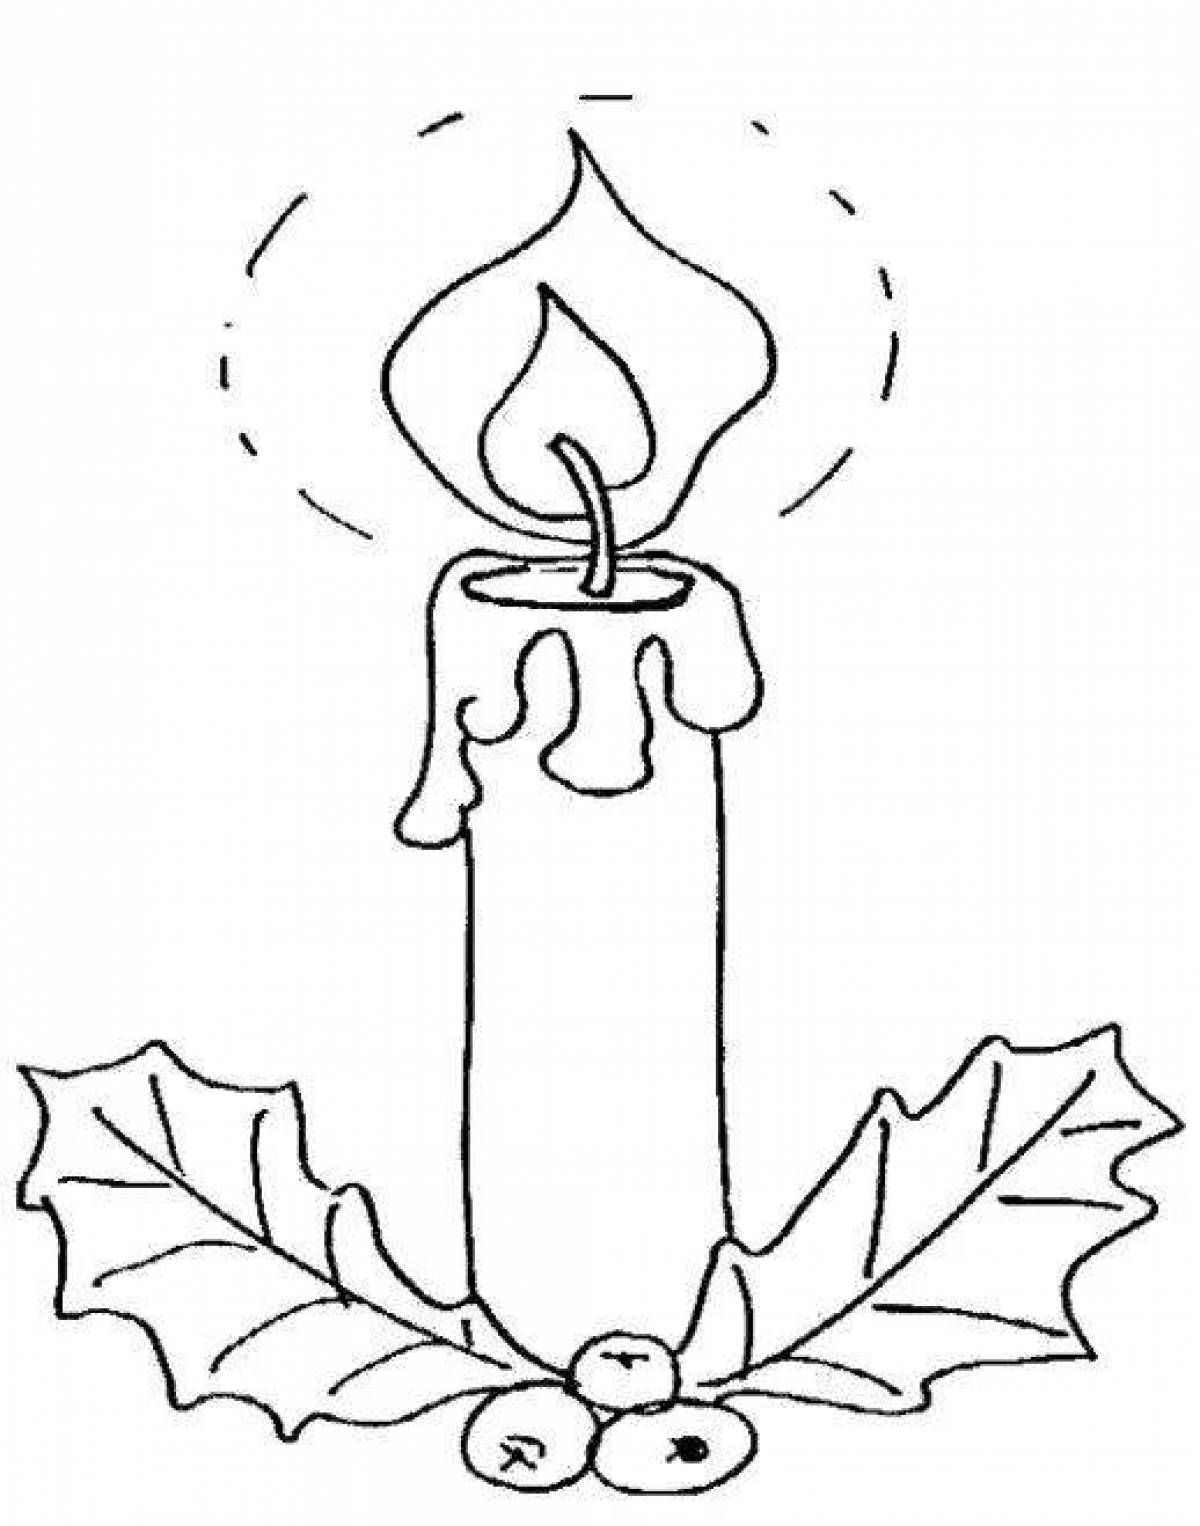 Rampant Christmas candle coloring page